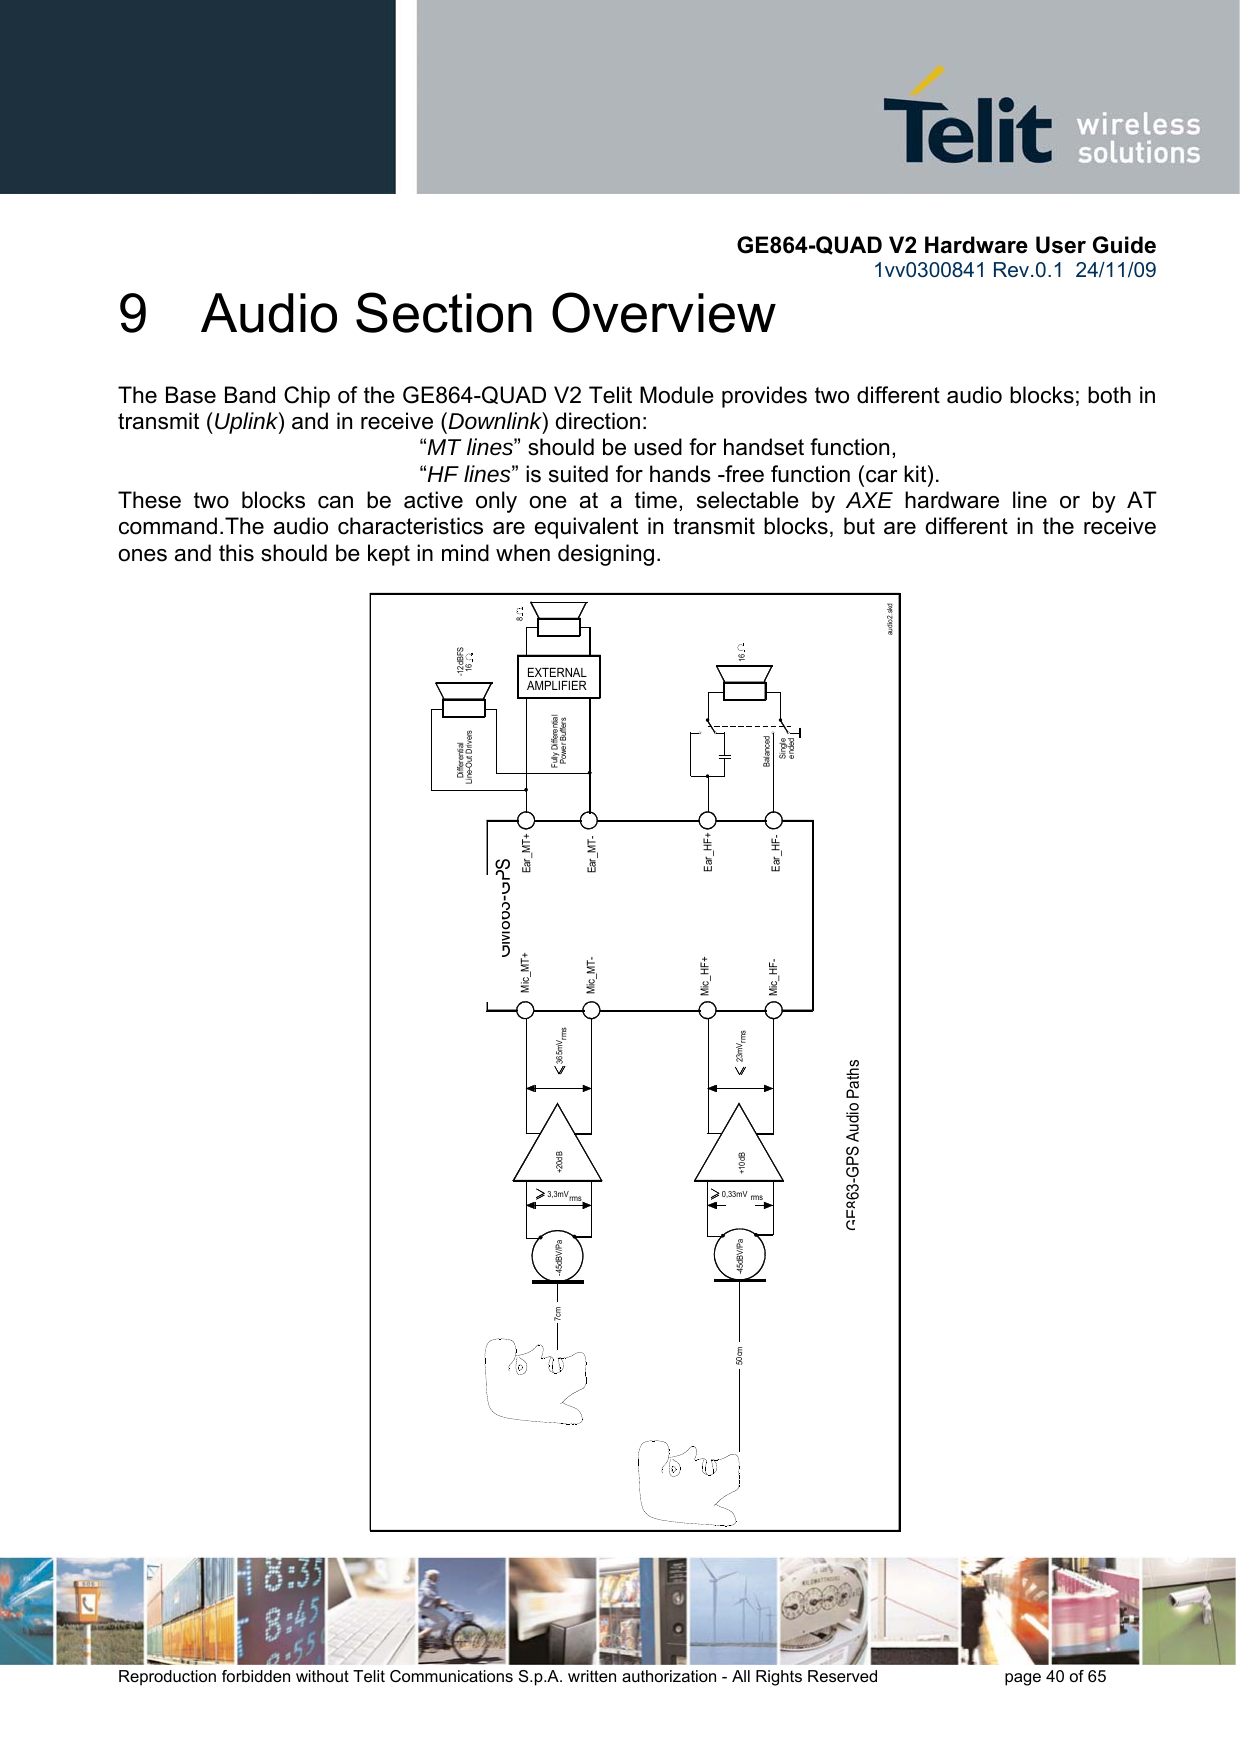       GE864-QUAD V2 Hardware User Guide 1vv0300841 Rev.0.1  24/11/09      Reproduction forbidden without Telit Communications S.p.A. written authorization - All Rights Reserved    page 40 of 65  9  Audio Section Overview The Base Band Chip of the GE864-QUAD V2 Telit Module provides two different audio blocks; both in transmit (Uplink) and in receive (Downlink) direction:  “MT lines” should be used for handset function,   “HF lines” is suited for hands -free function (car kit). These two blocks can be active only one at a time, selectable by AXE hardware line or by AT command.The audio characteristics are equivalent in transmit blocks, but are different in the receive ones and this should be kept in mind when designing.  GE863-GPS Audio Paths   Differential Line-Out Drivers Fully Differential  Power Buffers EXTERNALAMPLIFIER-12dBFS  16816+10dB-45dBV/PaMic_HF-Ear_HF-BalancedSingle endedMic_HF+Ear_HF+50cm23mVrms0,33mV rmsaudio2.skdGM863-GPS+20dB7cm-45dBV/Pa3,3mVrms365mVrmsMic_MT+Ear_MT+Mic_MT-Ear_MT-   